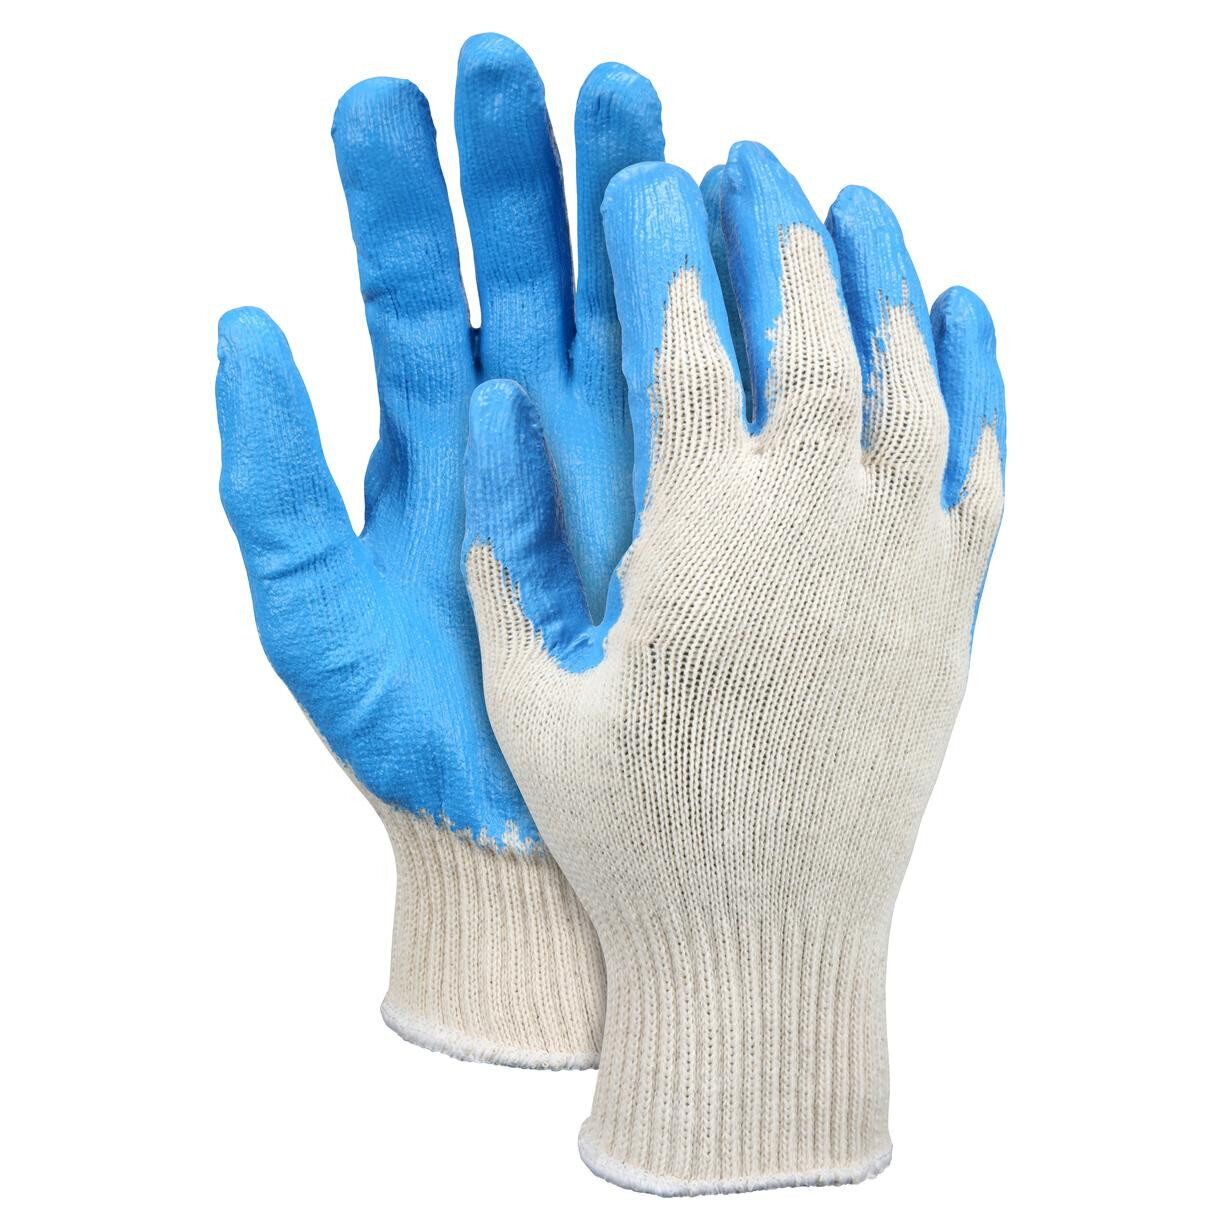 MCR Safety (9682) Cotton Polyester Work Gloves, Latex Coat, Size Large